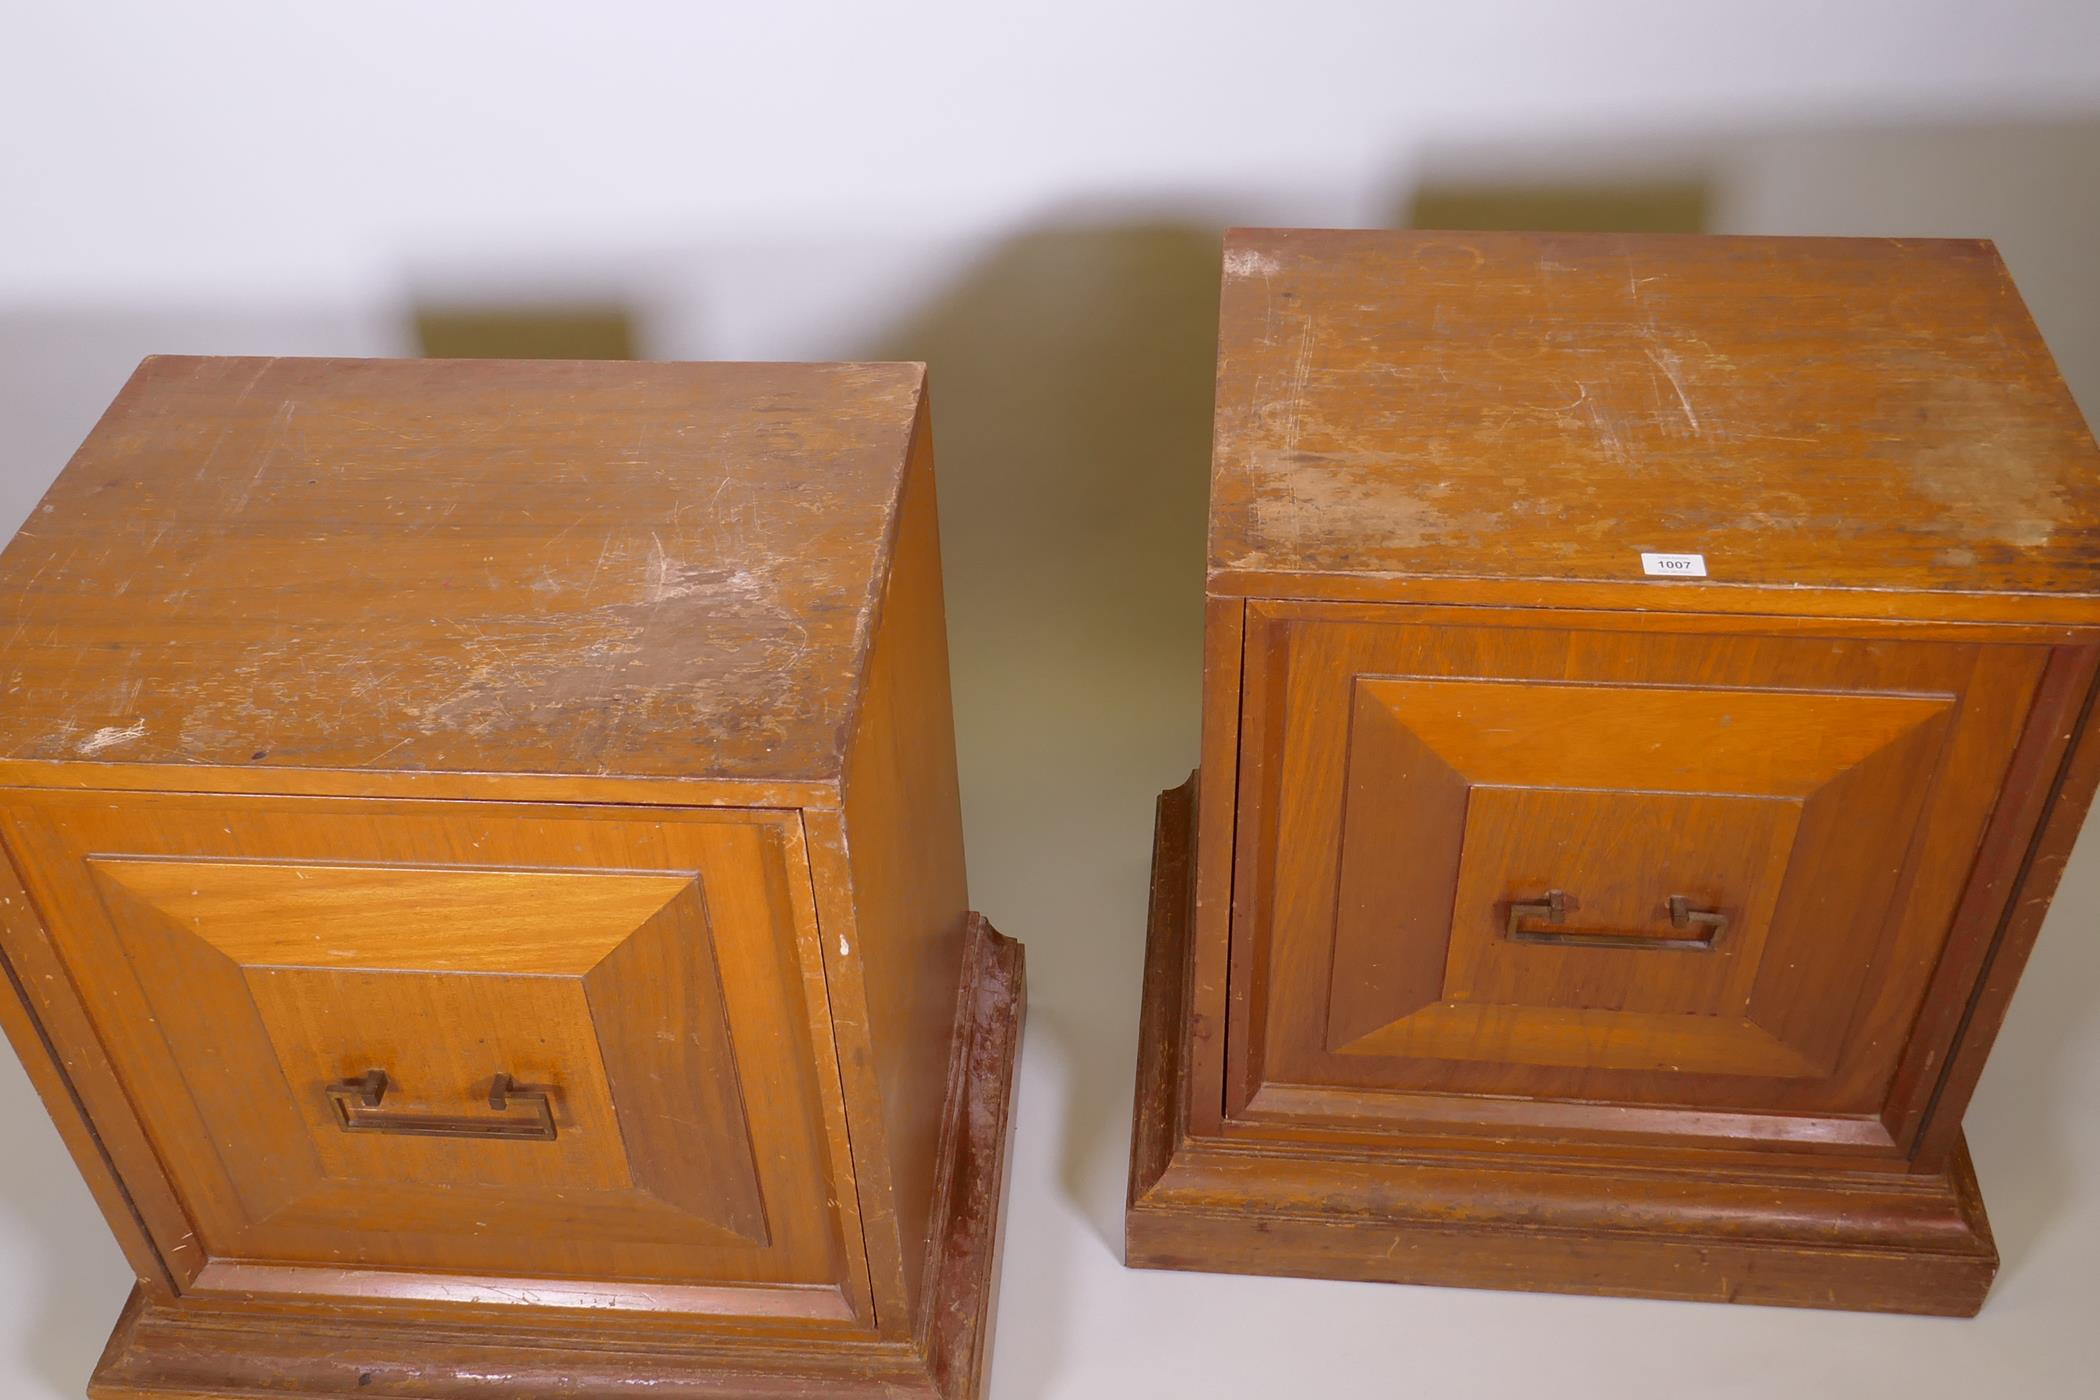 A pair of Younger mahogany pedestal cabinets, with moulded doors and plinth bases, 28" x 20" x 28" - Image 5 of 5